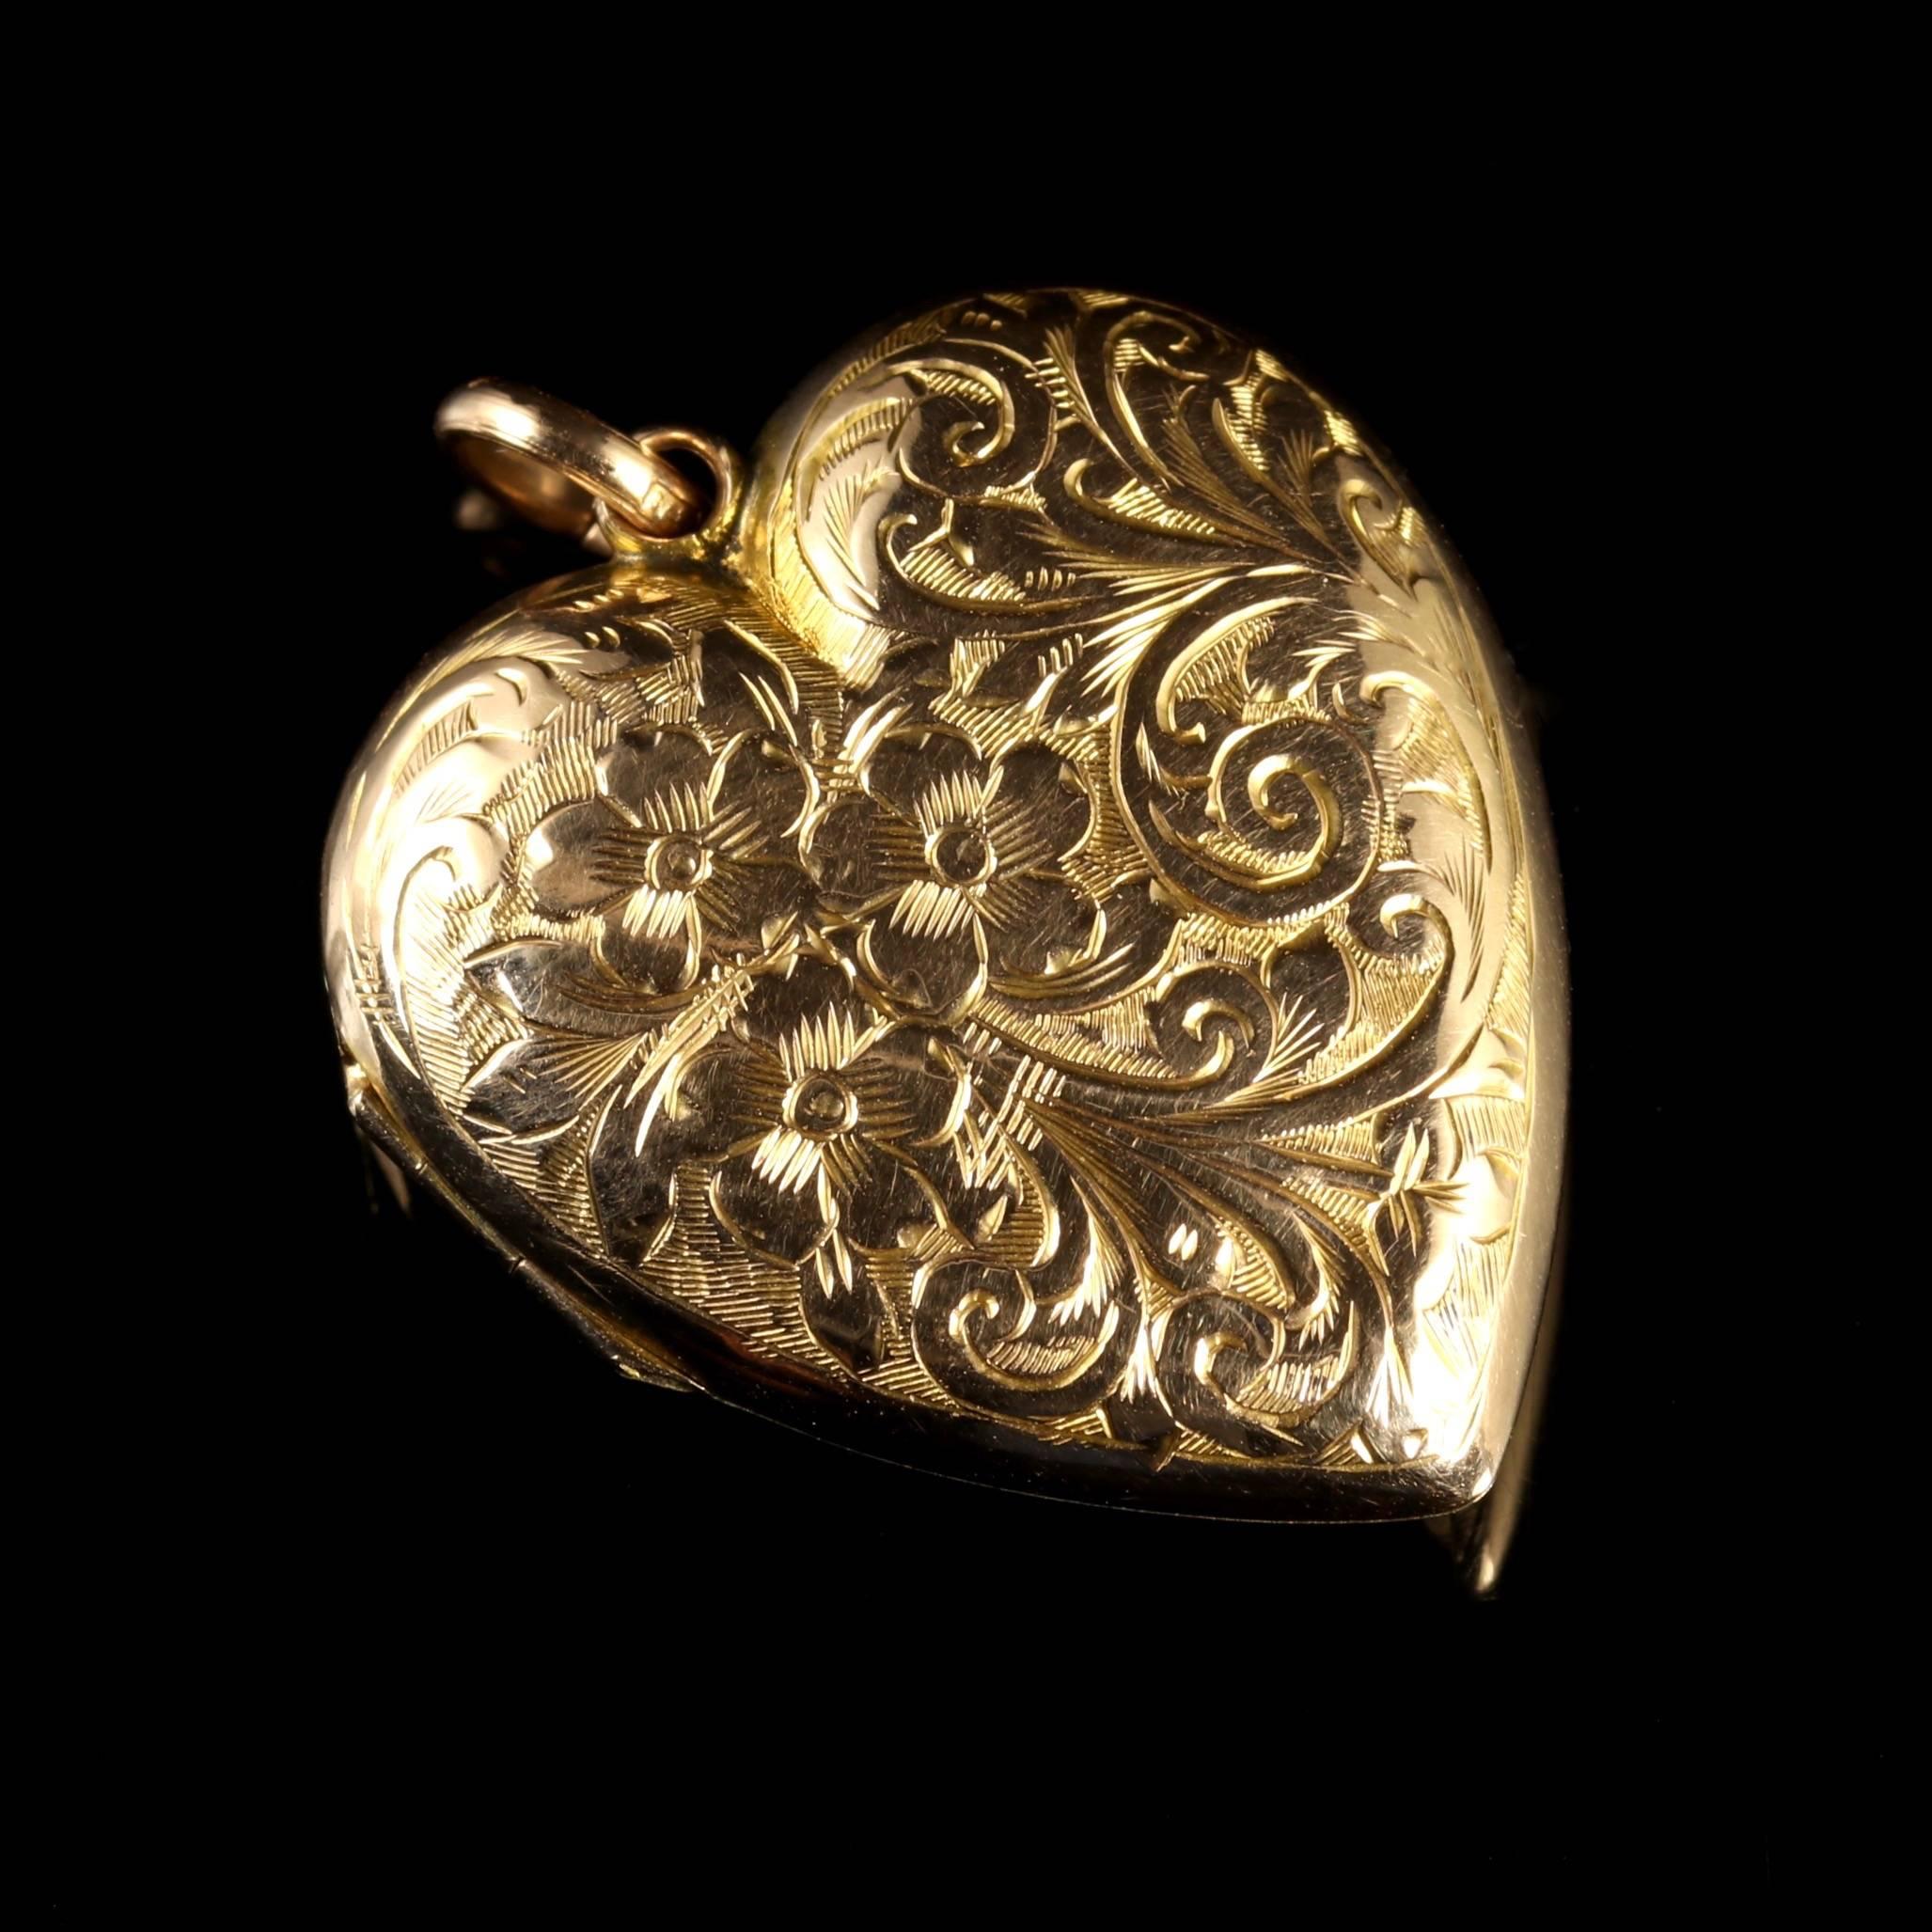 This beautiful Victorian 9ct Yellow Gold heart locket is Circa 1900.

Set with lovely engraved workmanship from the Victorian period.

Forget me nots can be seen on the front of the locket.

Forget me not, O Lord! is what a poor German knight